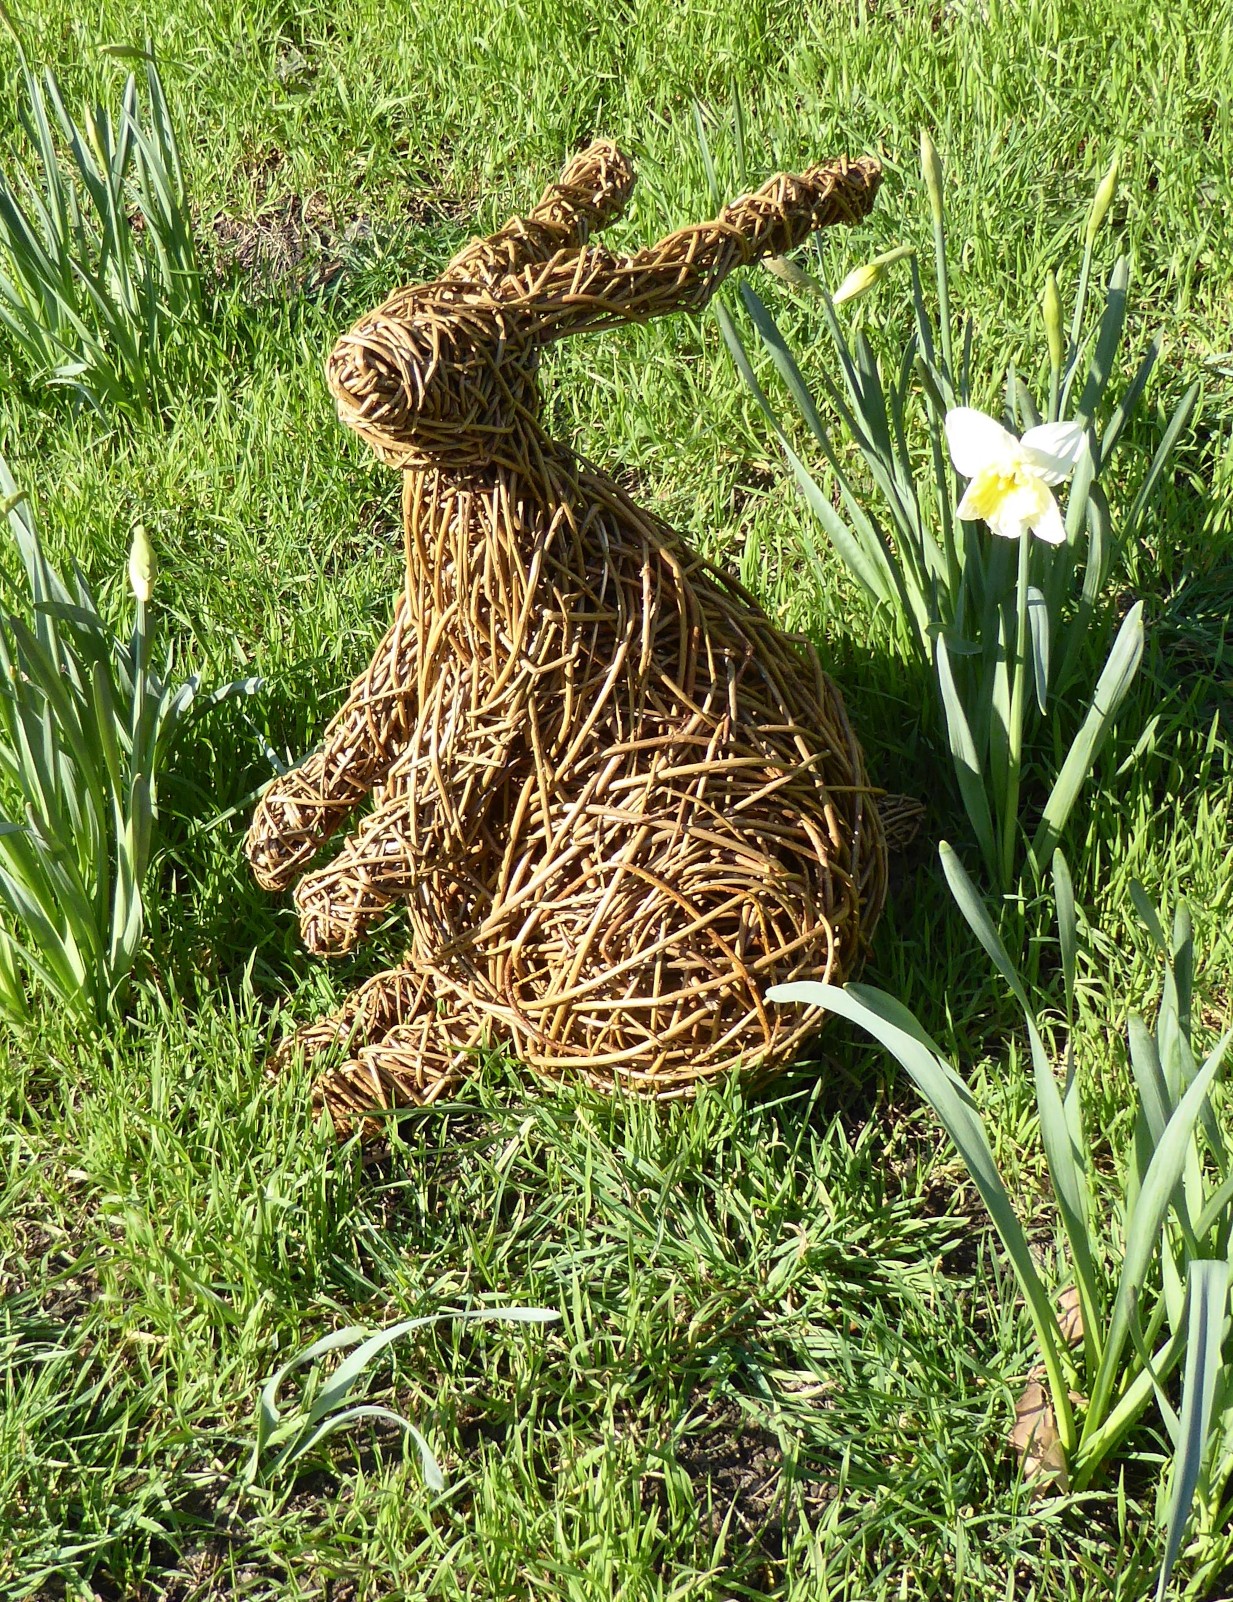 willow hare sculpture sitting on grass with daffodils he has a large fat bottom